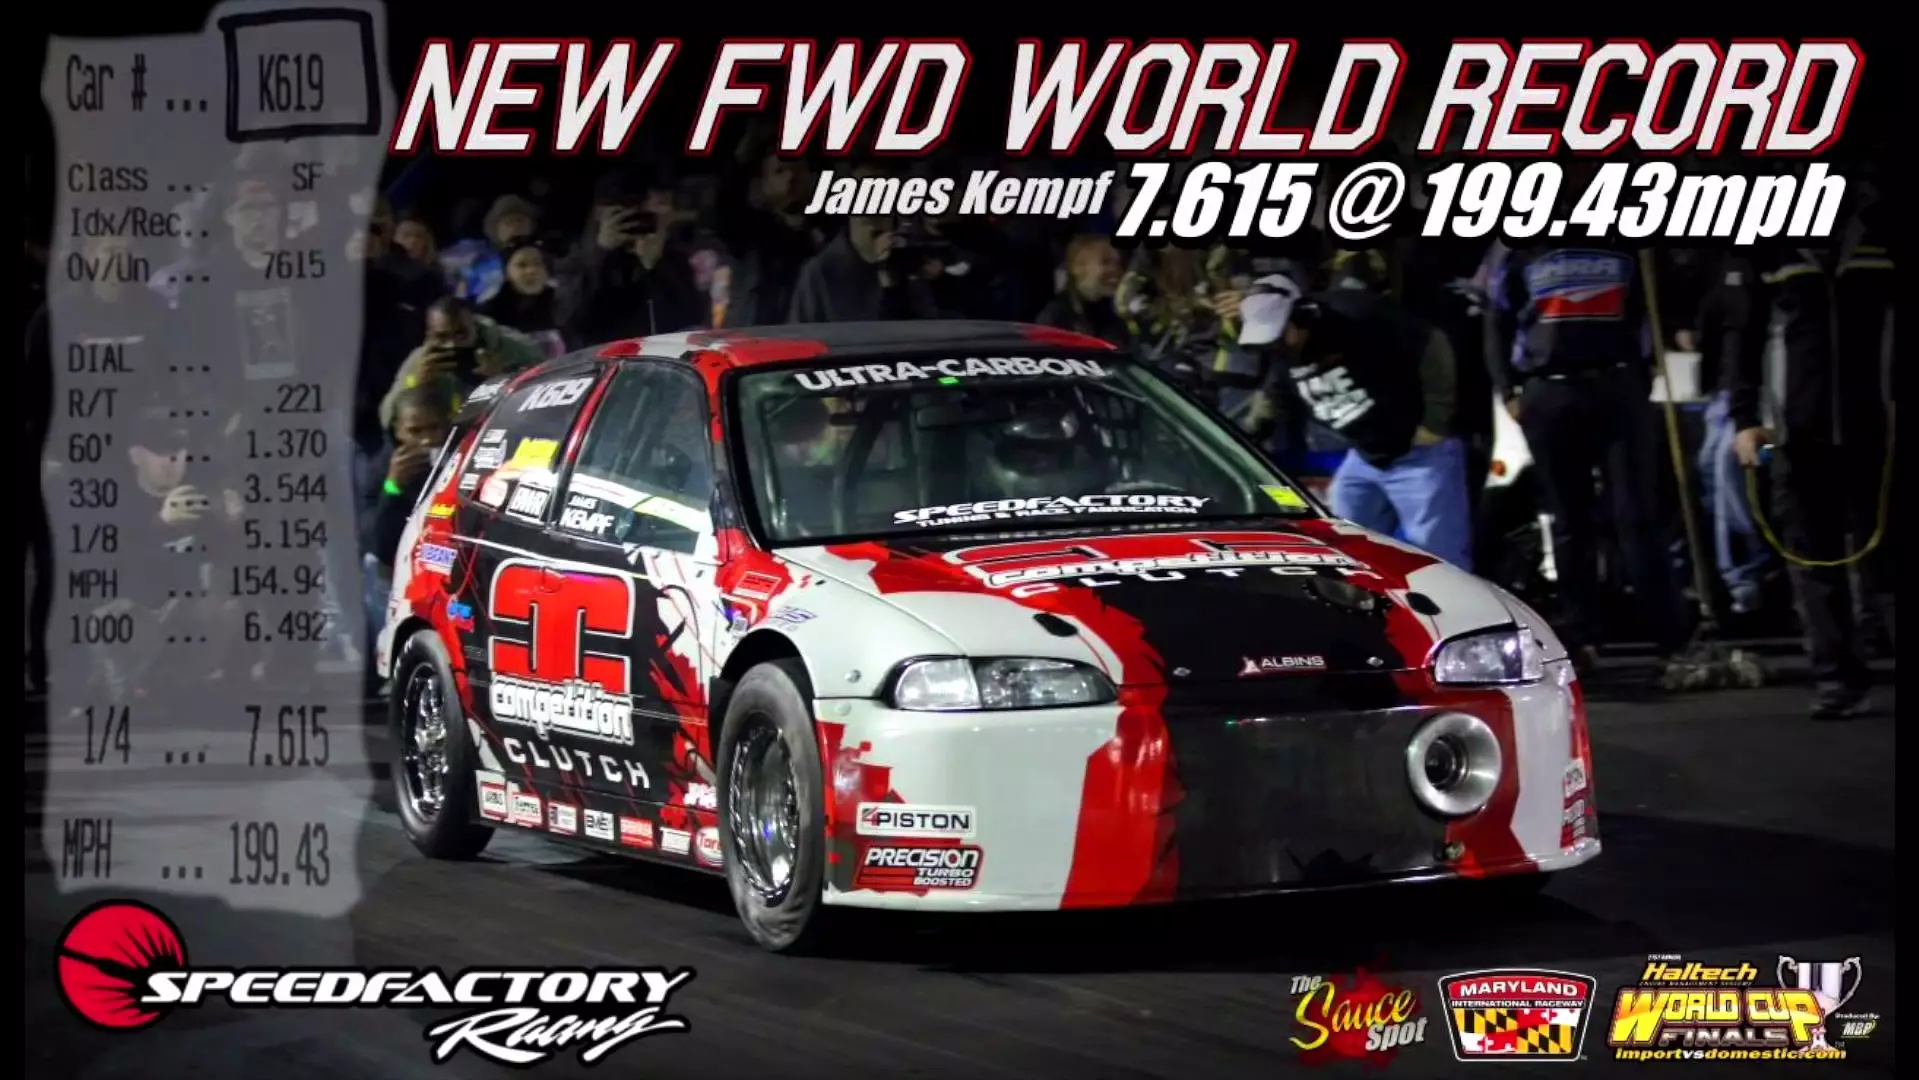 The "old man" Honda Civic has just broken another world record